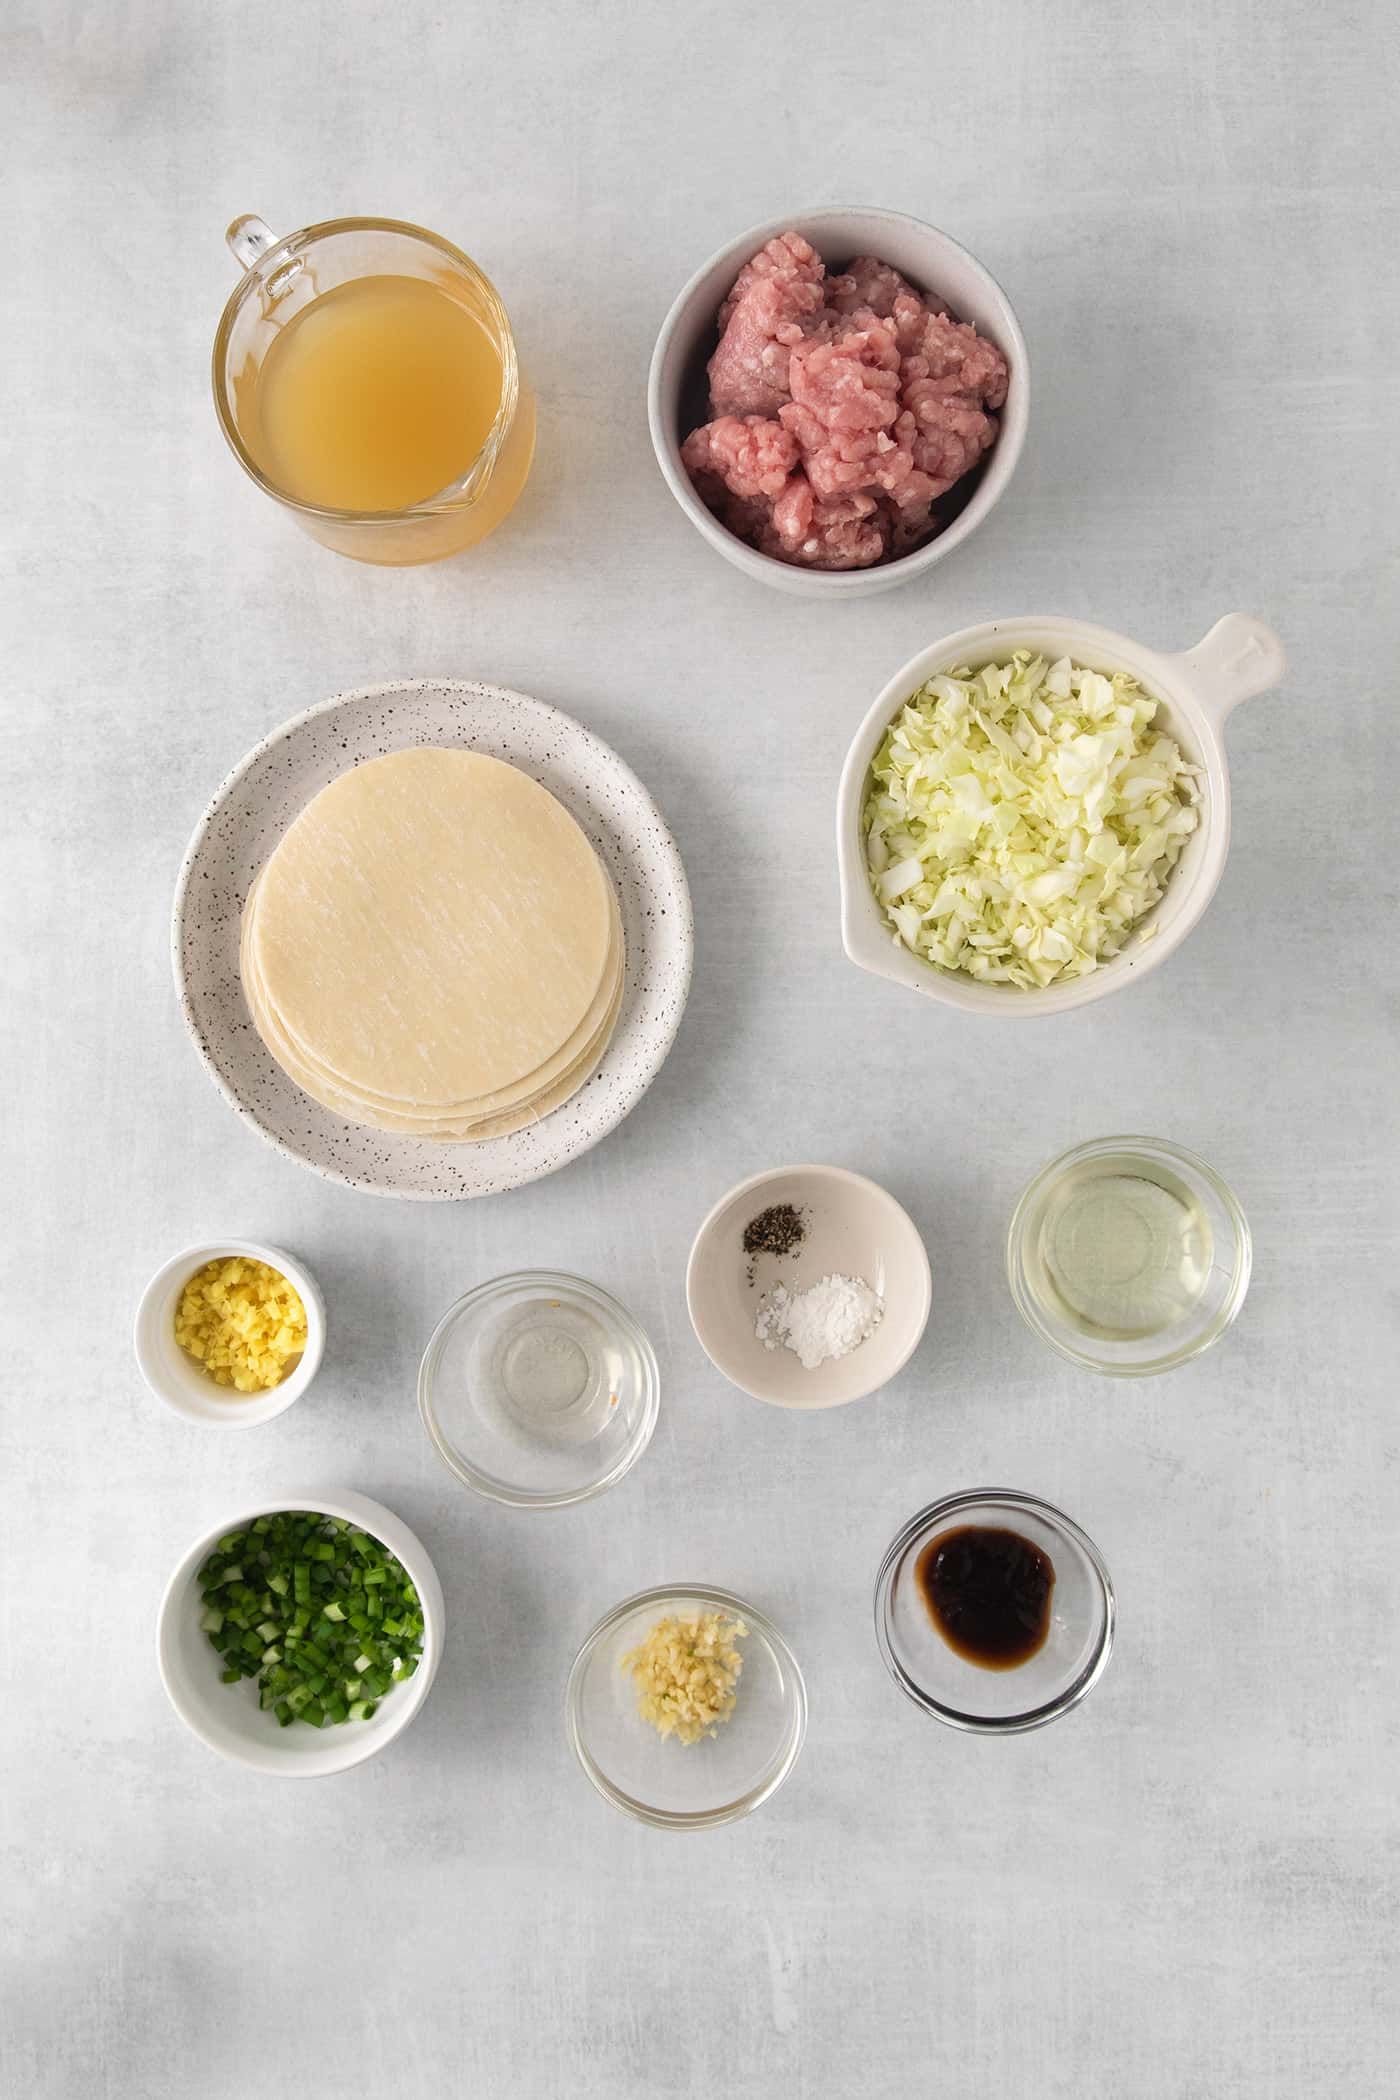 Overhead view of pork and cabbage potsticker ingredients